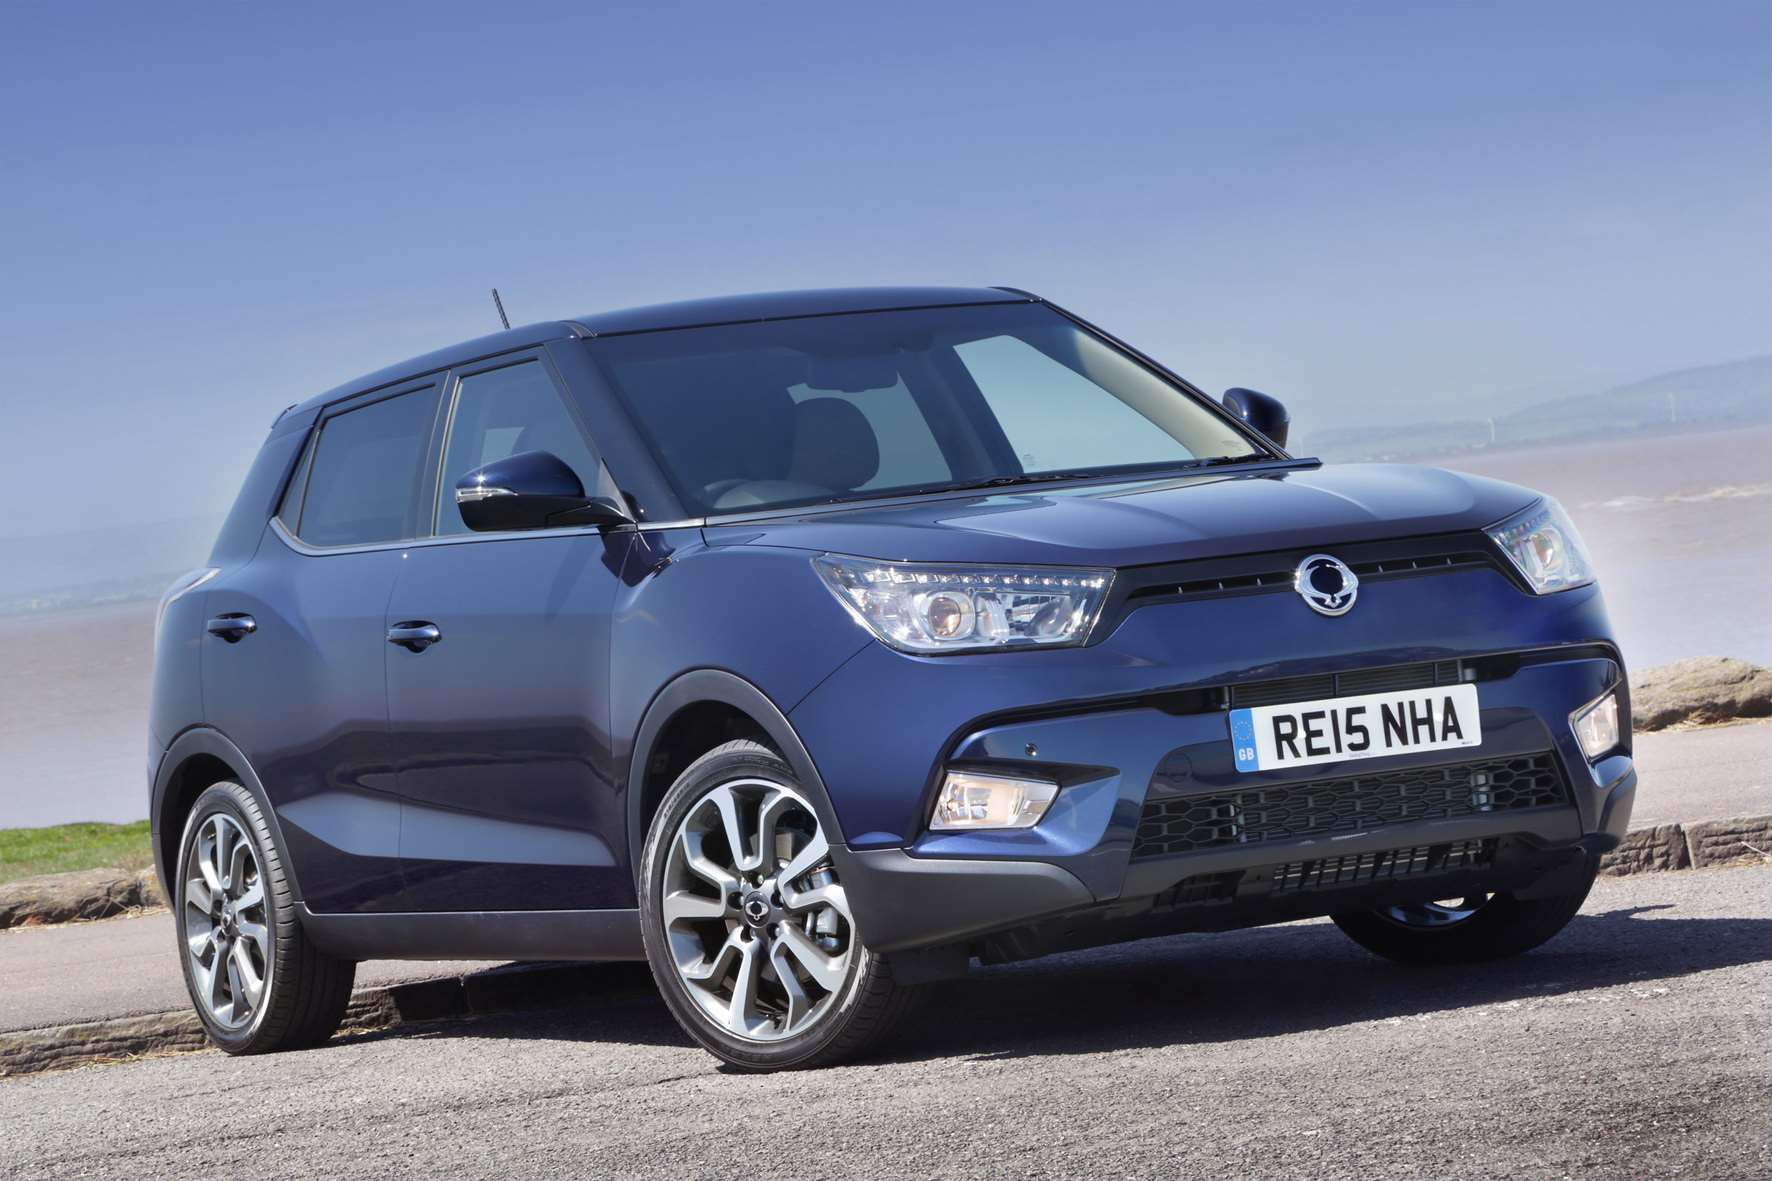 Hidsons is SsangYong's second-largest dealer in the UK